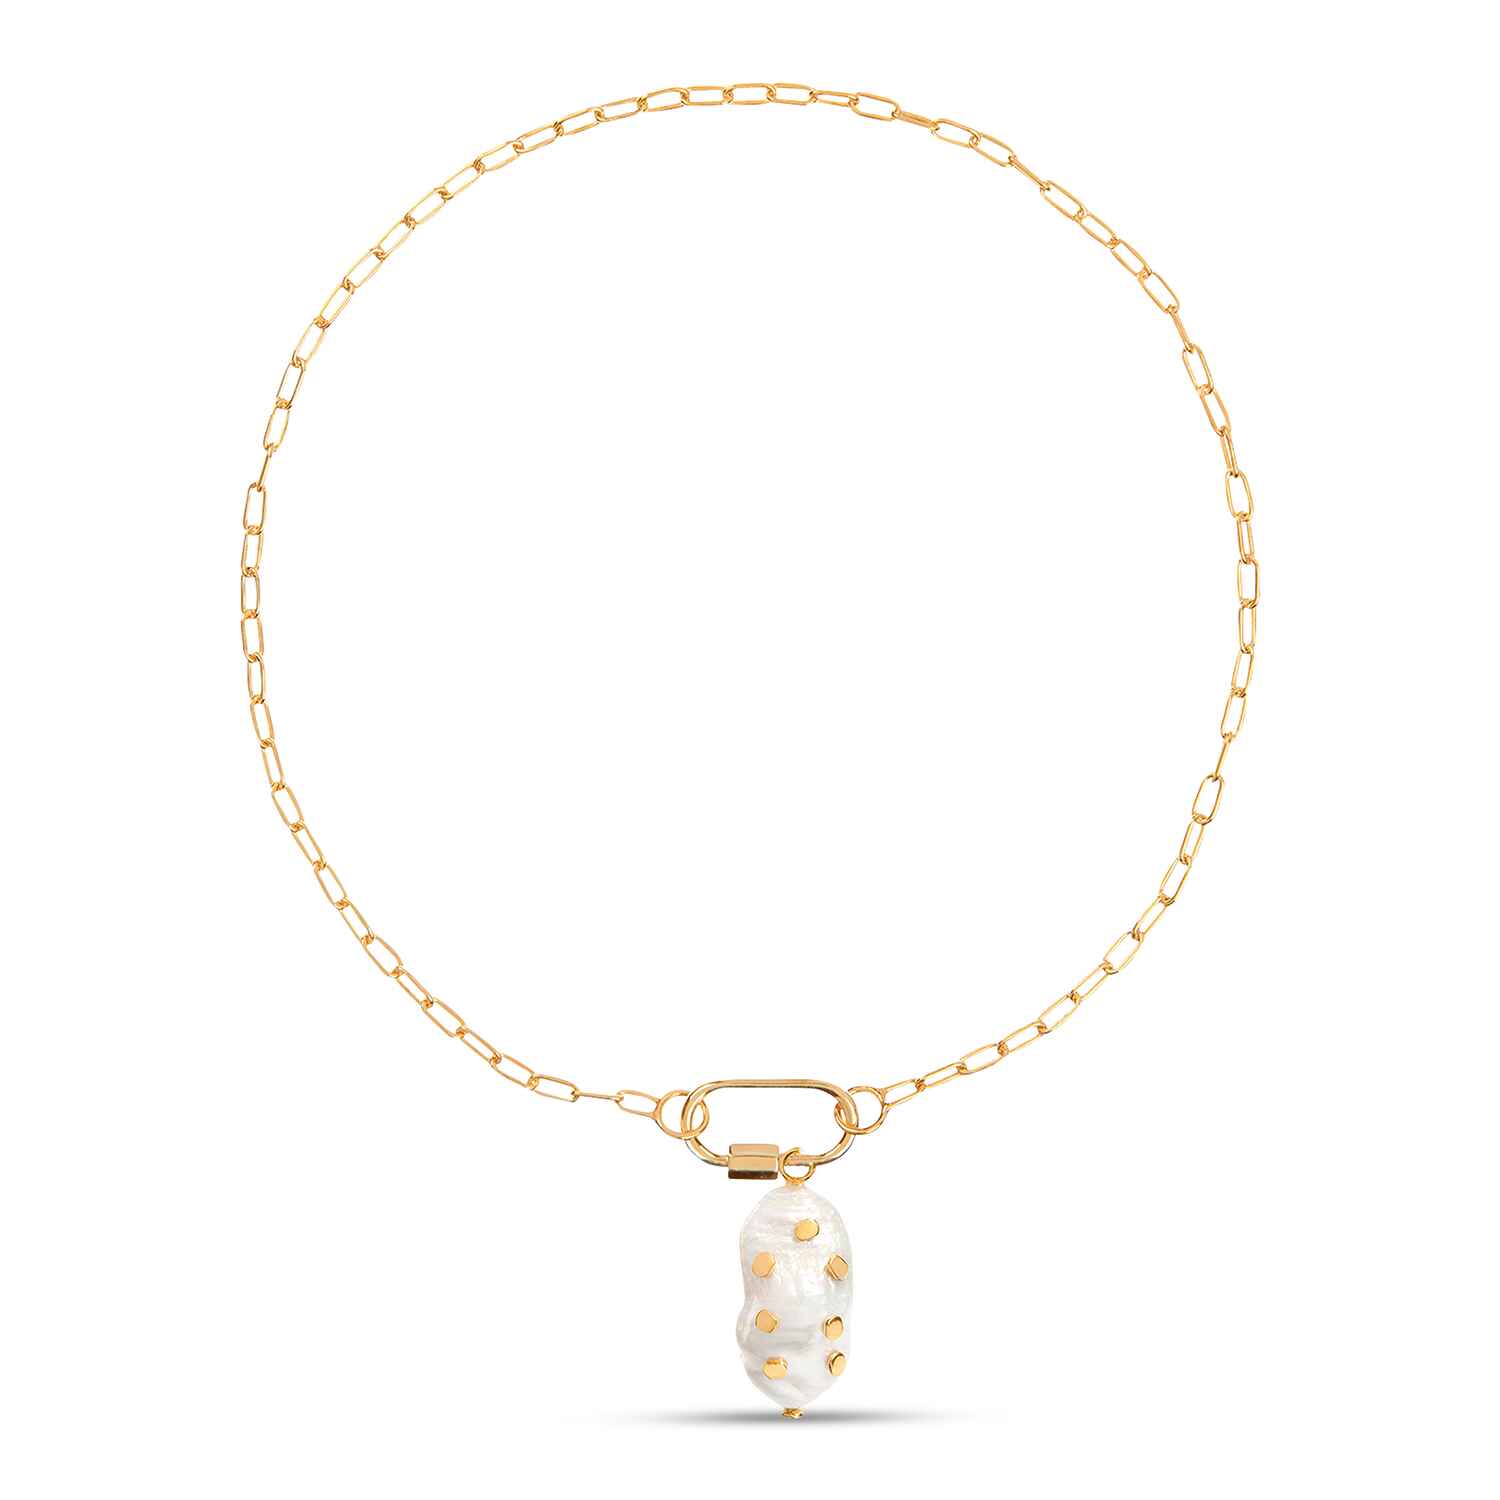 Our Daphne Gold Paperclip Chain Necklace With Barnacle Pendant is an absolute must-have. This chain necklace has a lock that you can open to add a charm to the existing vintage pearl adorned with gold chips.